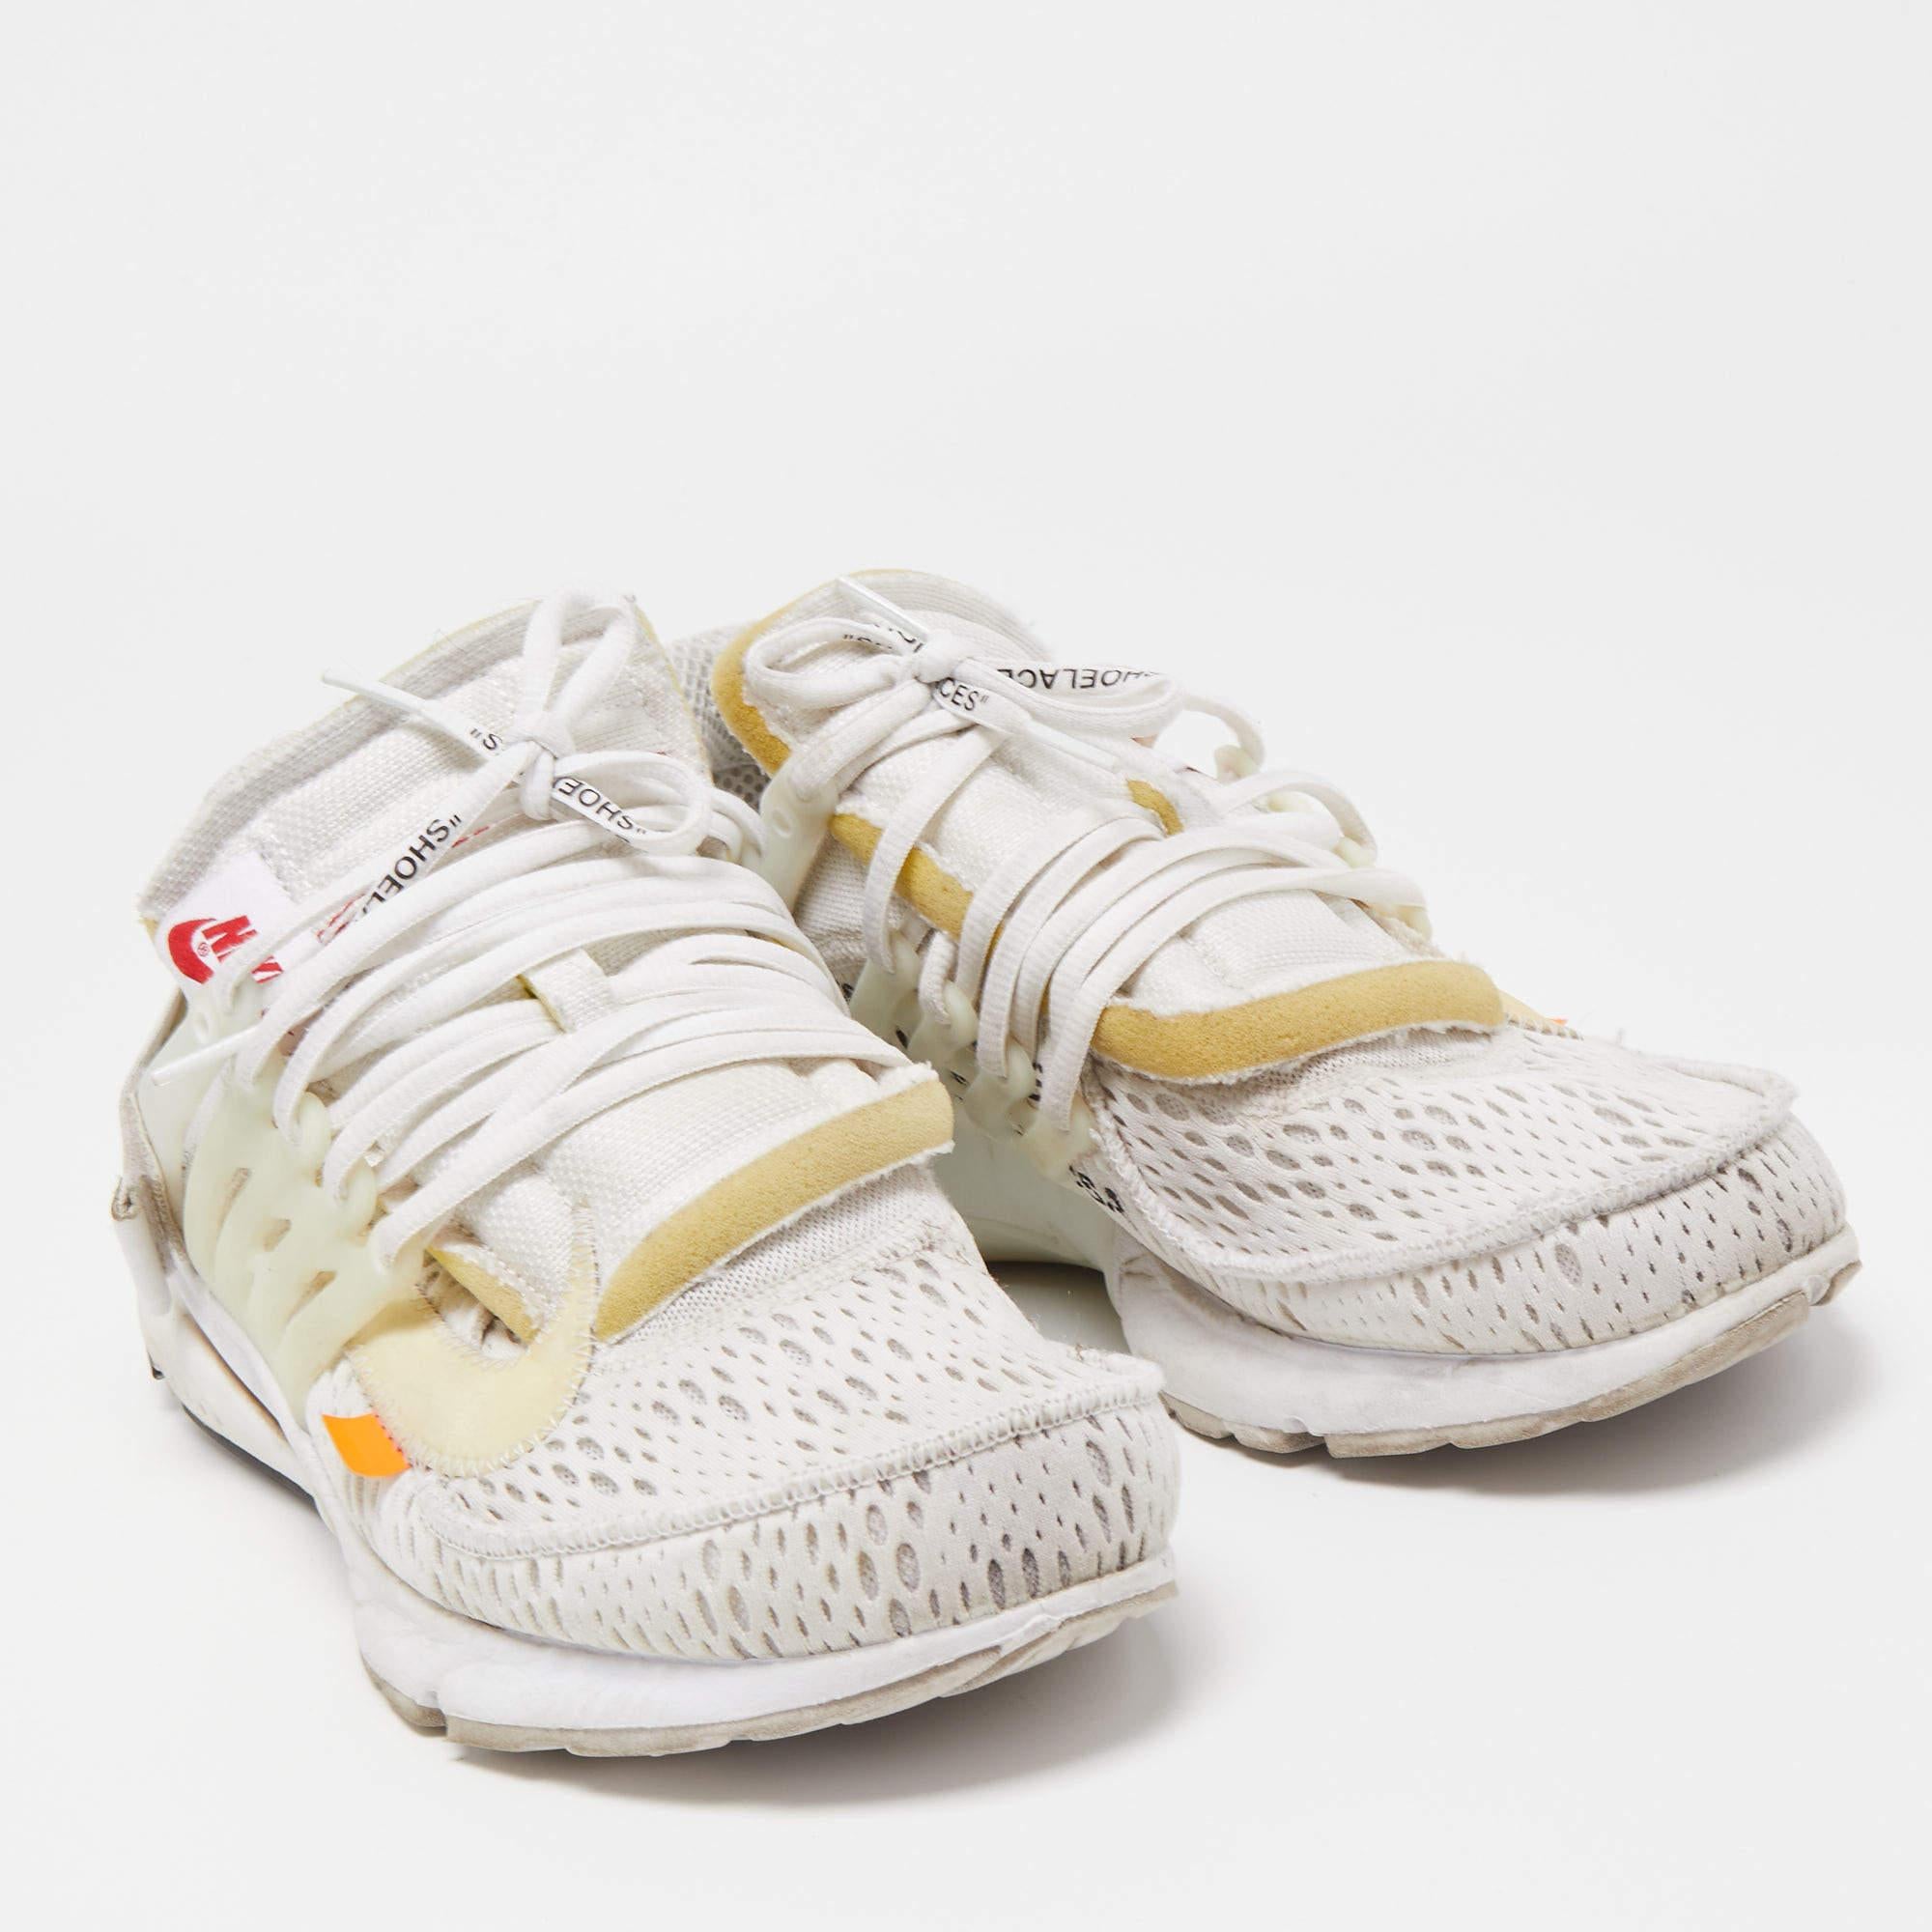 Nike x Off White White Fabric Air Presto Low Trainers Sneakers Size 42.5 For Sale 2